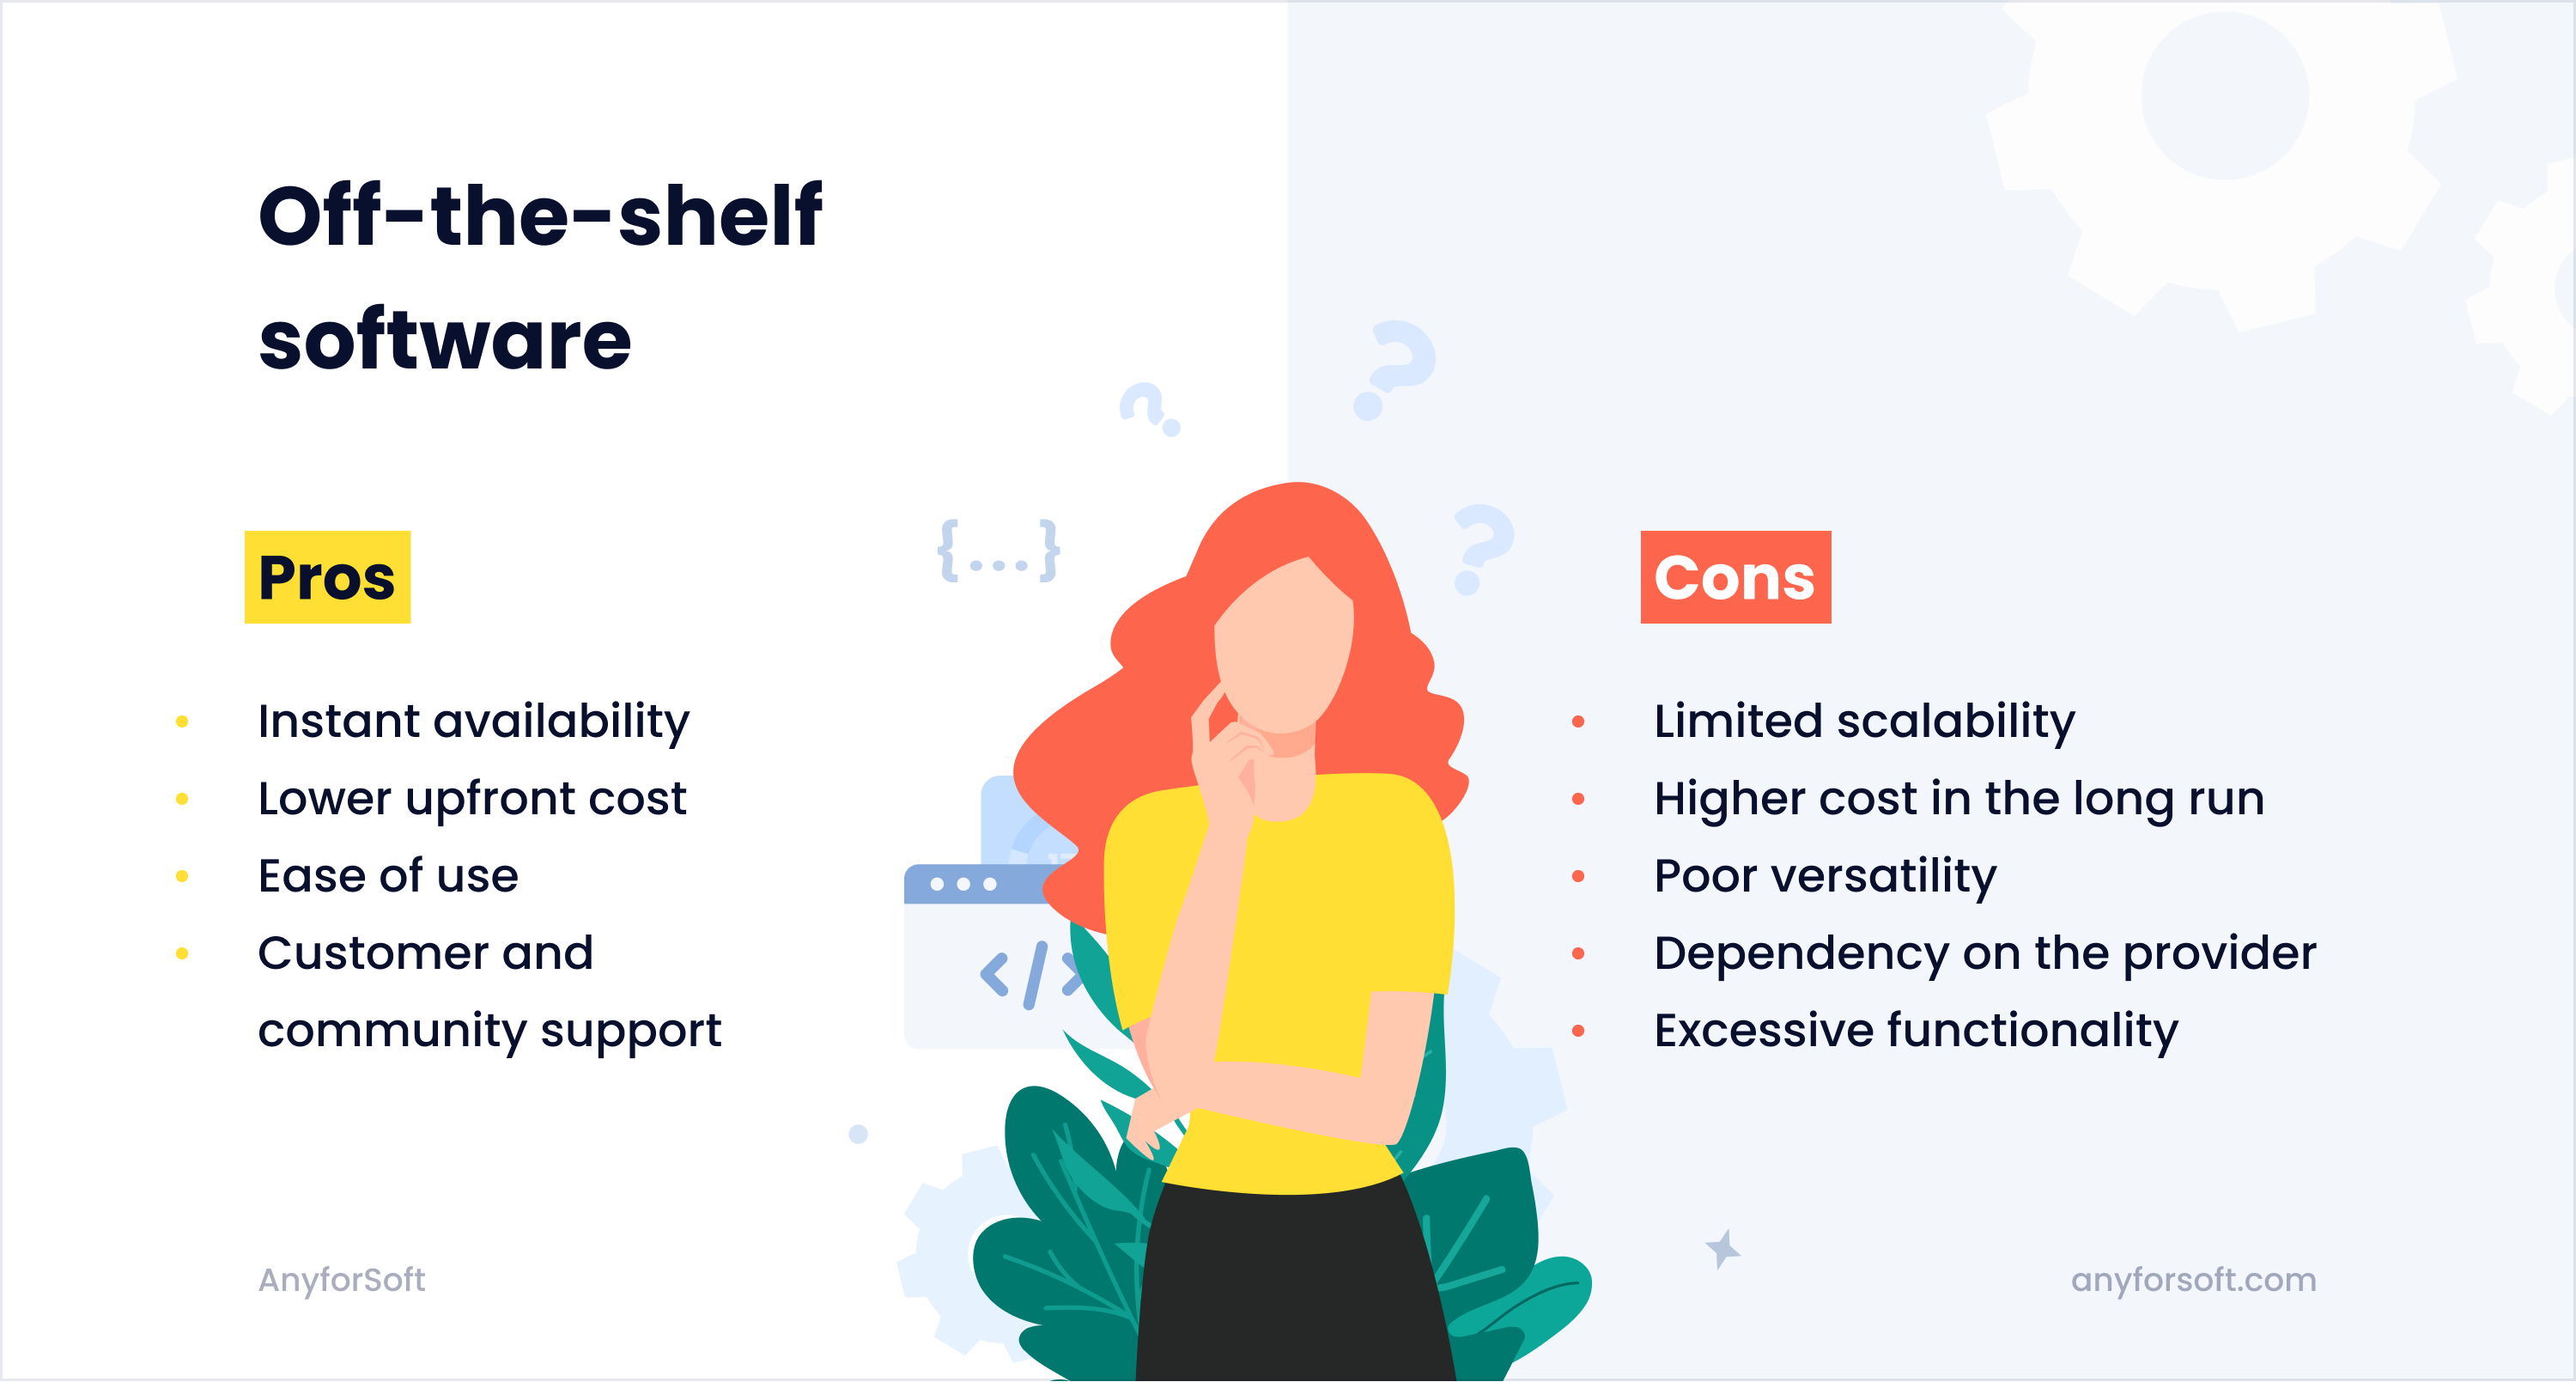 Off-the-shelf software Pros and Cons